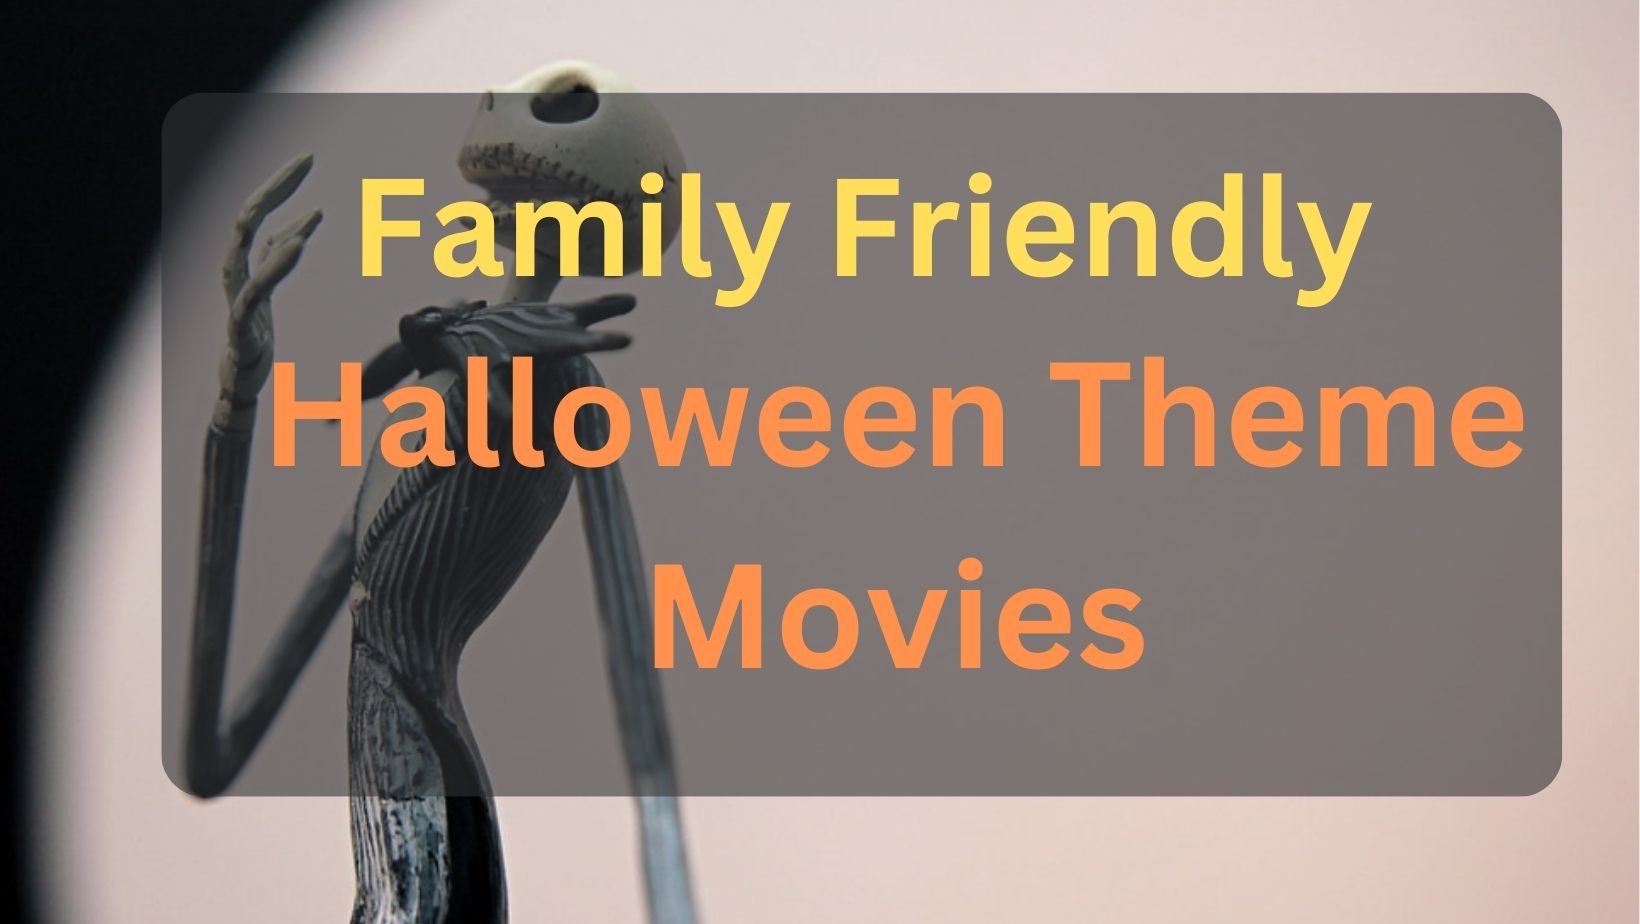 12 Best Halloween Movies Family Friendly with a Halloween Theme